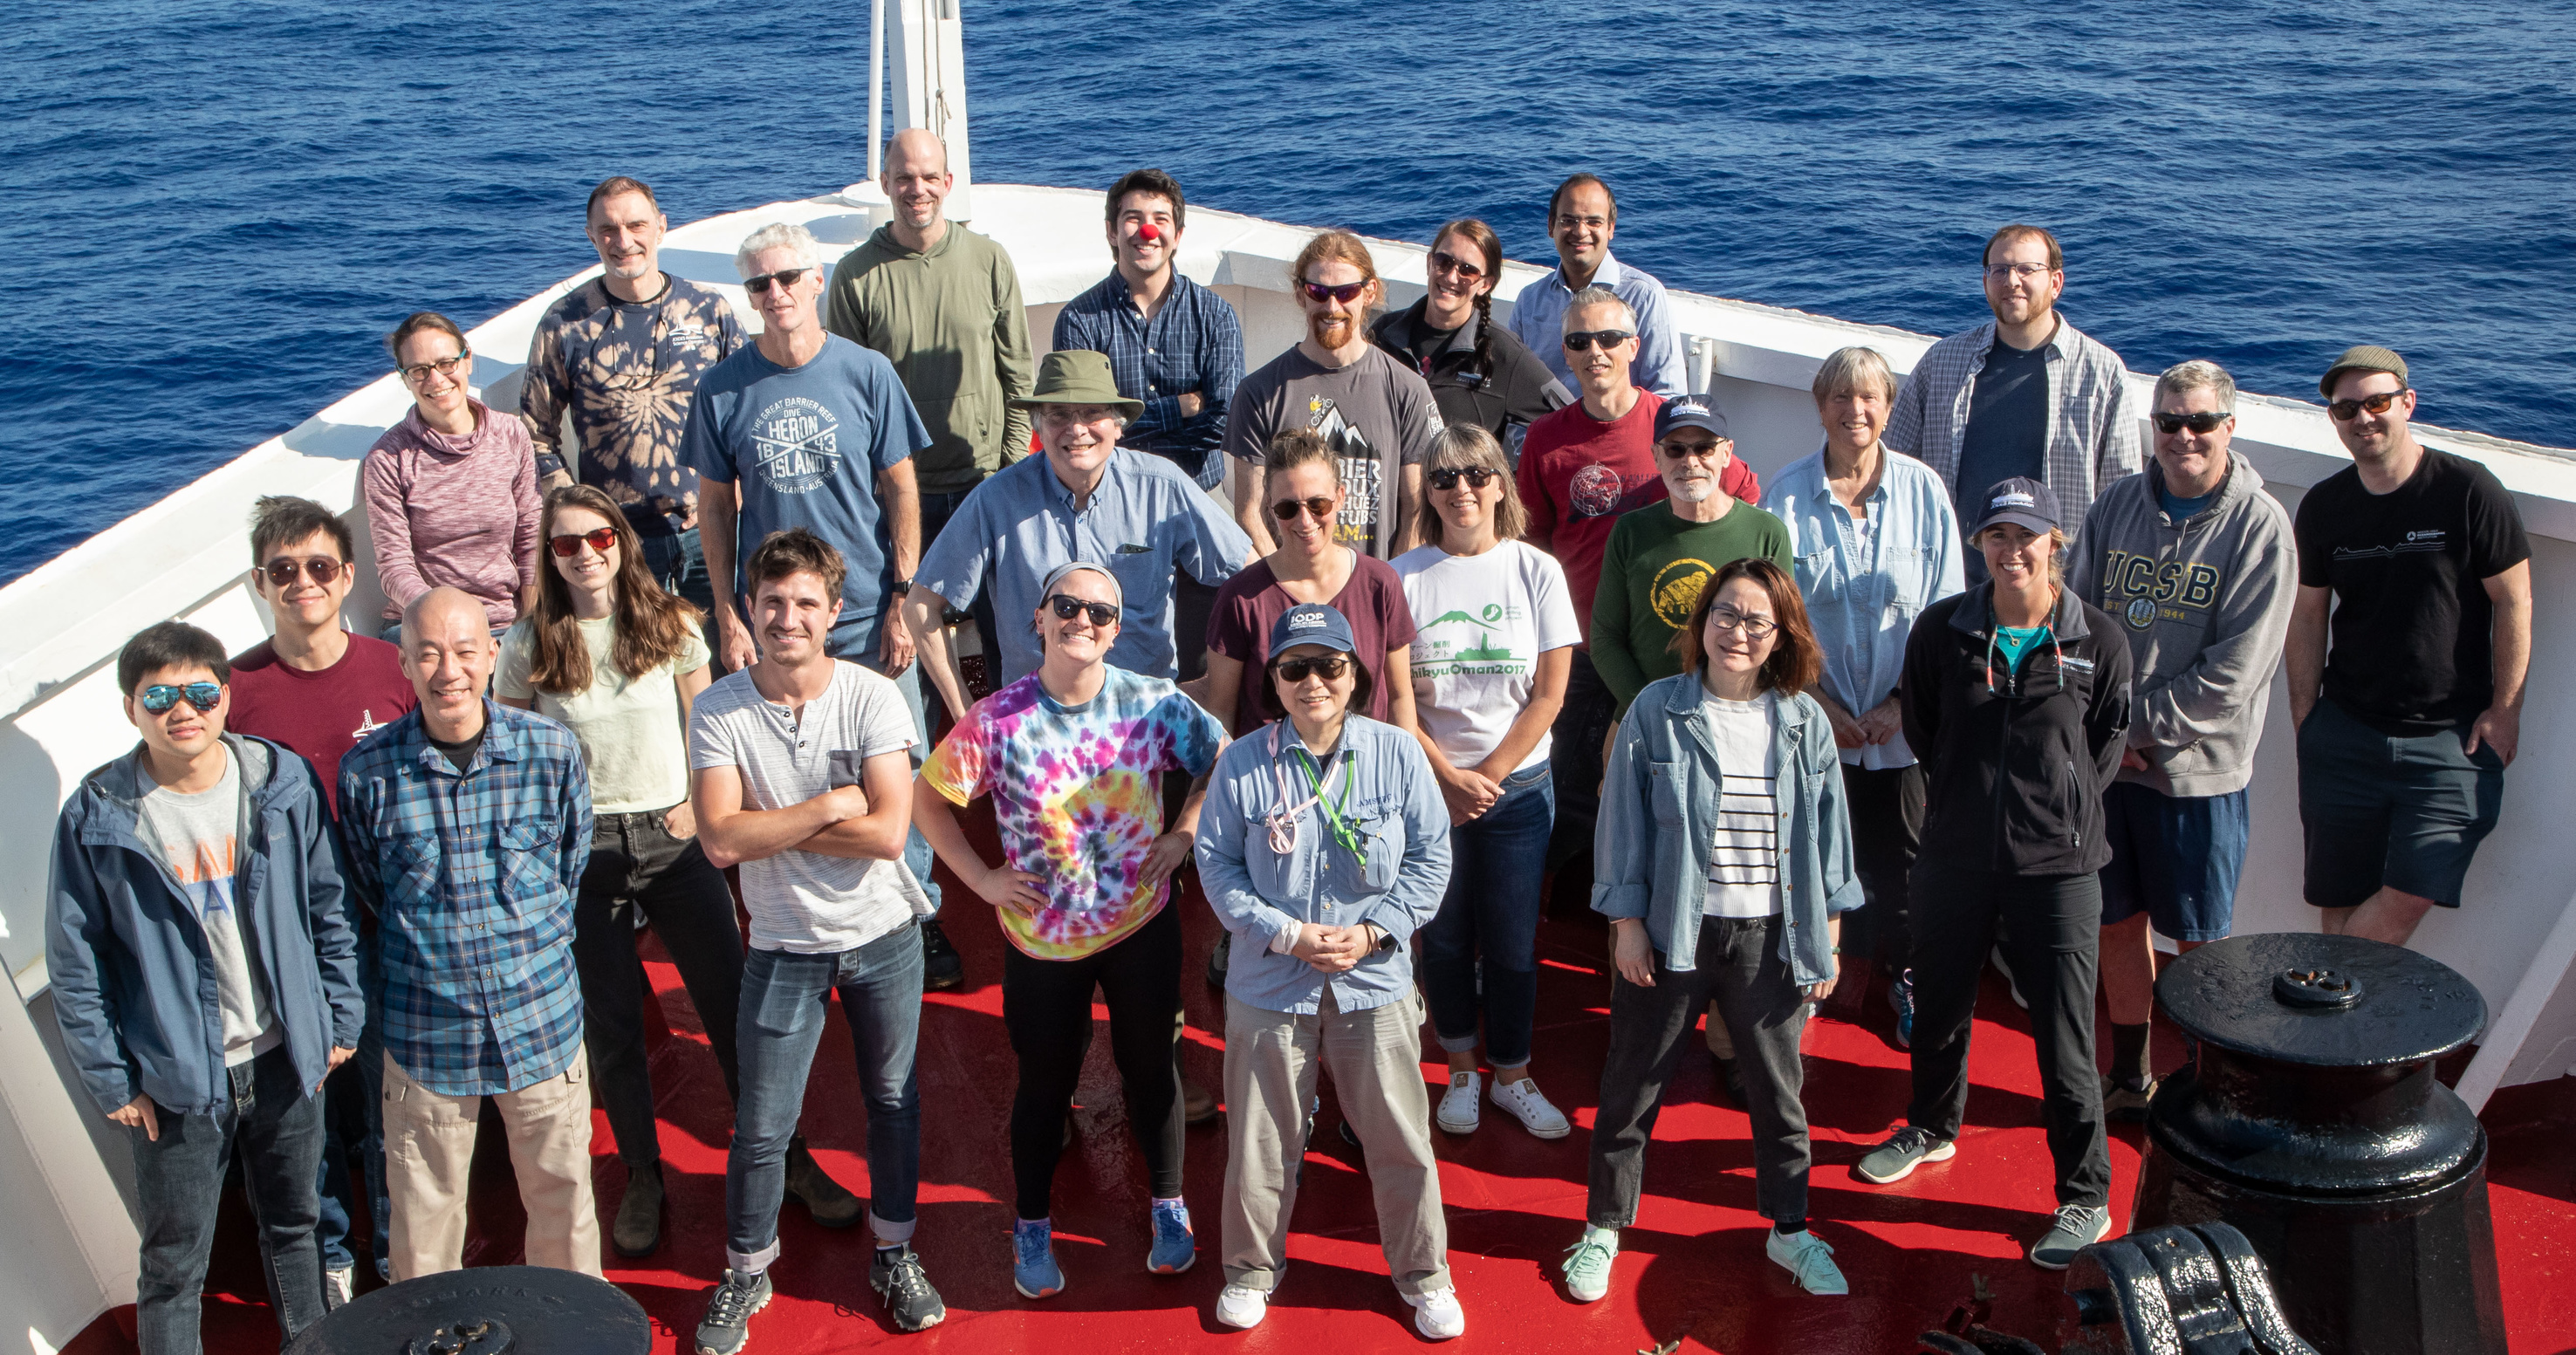 A group photo of researchers on the bow of a ship at sea.